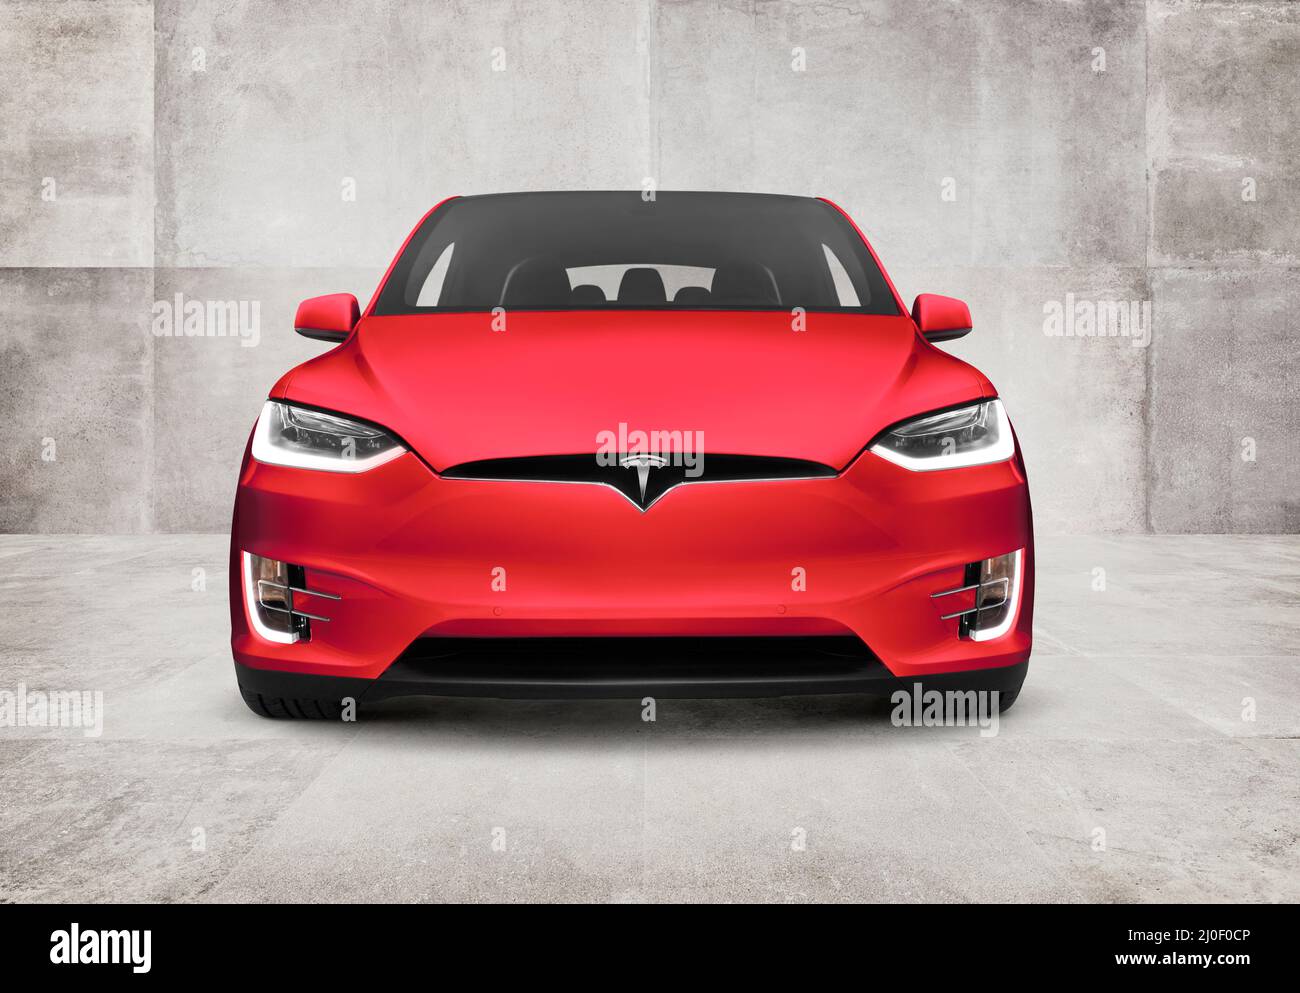 Red Tesla Model X luxury SUV electric car front view on concrete wall background Stock Photo